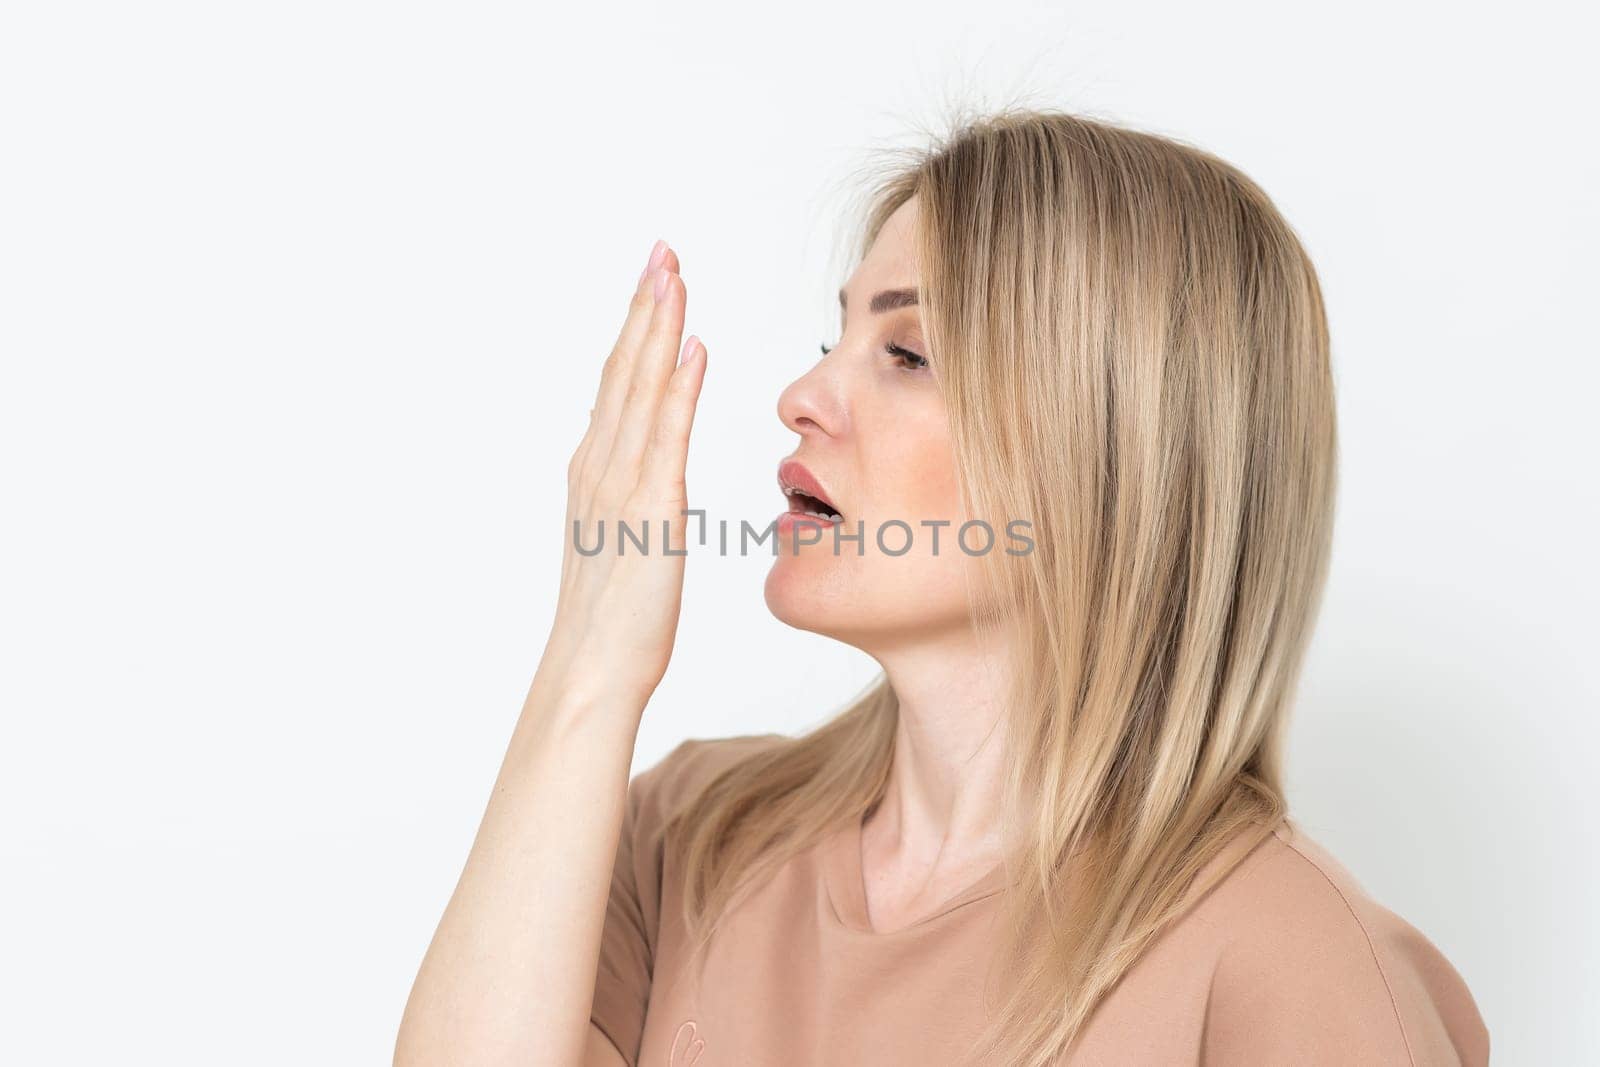 Health Care: Woman checking her breath with hand. Closeup portrait headshot sleepy young woman with wide open mouth